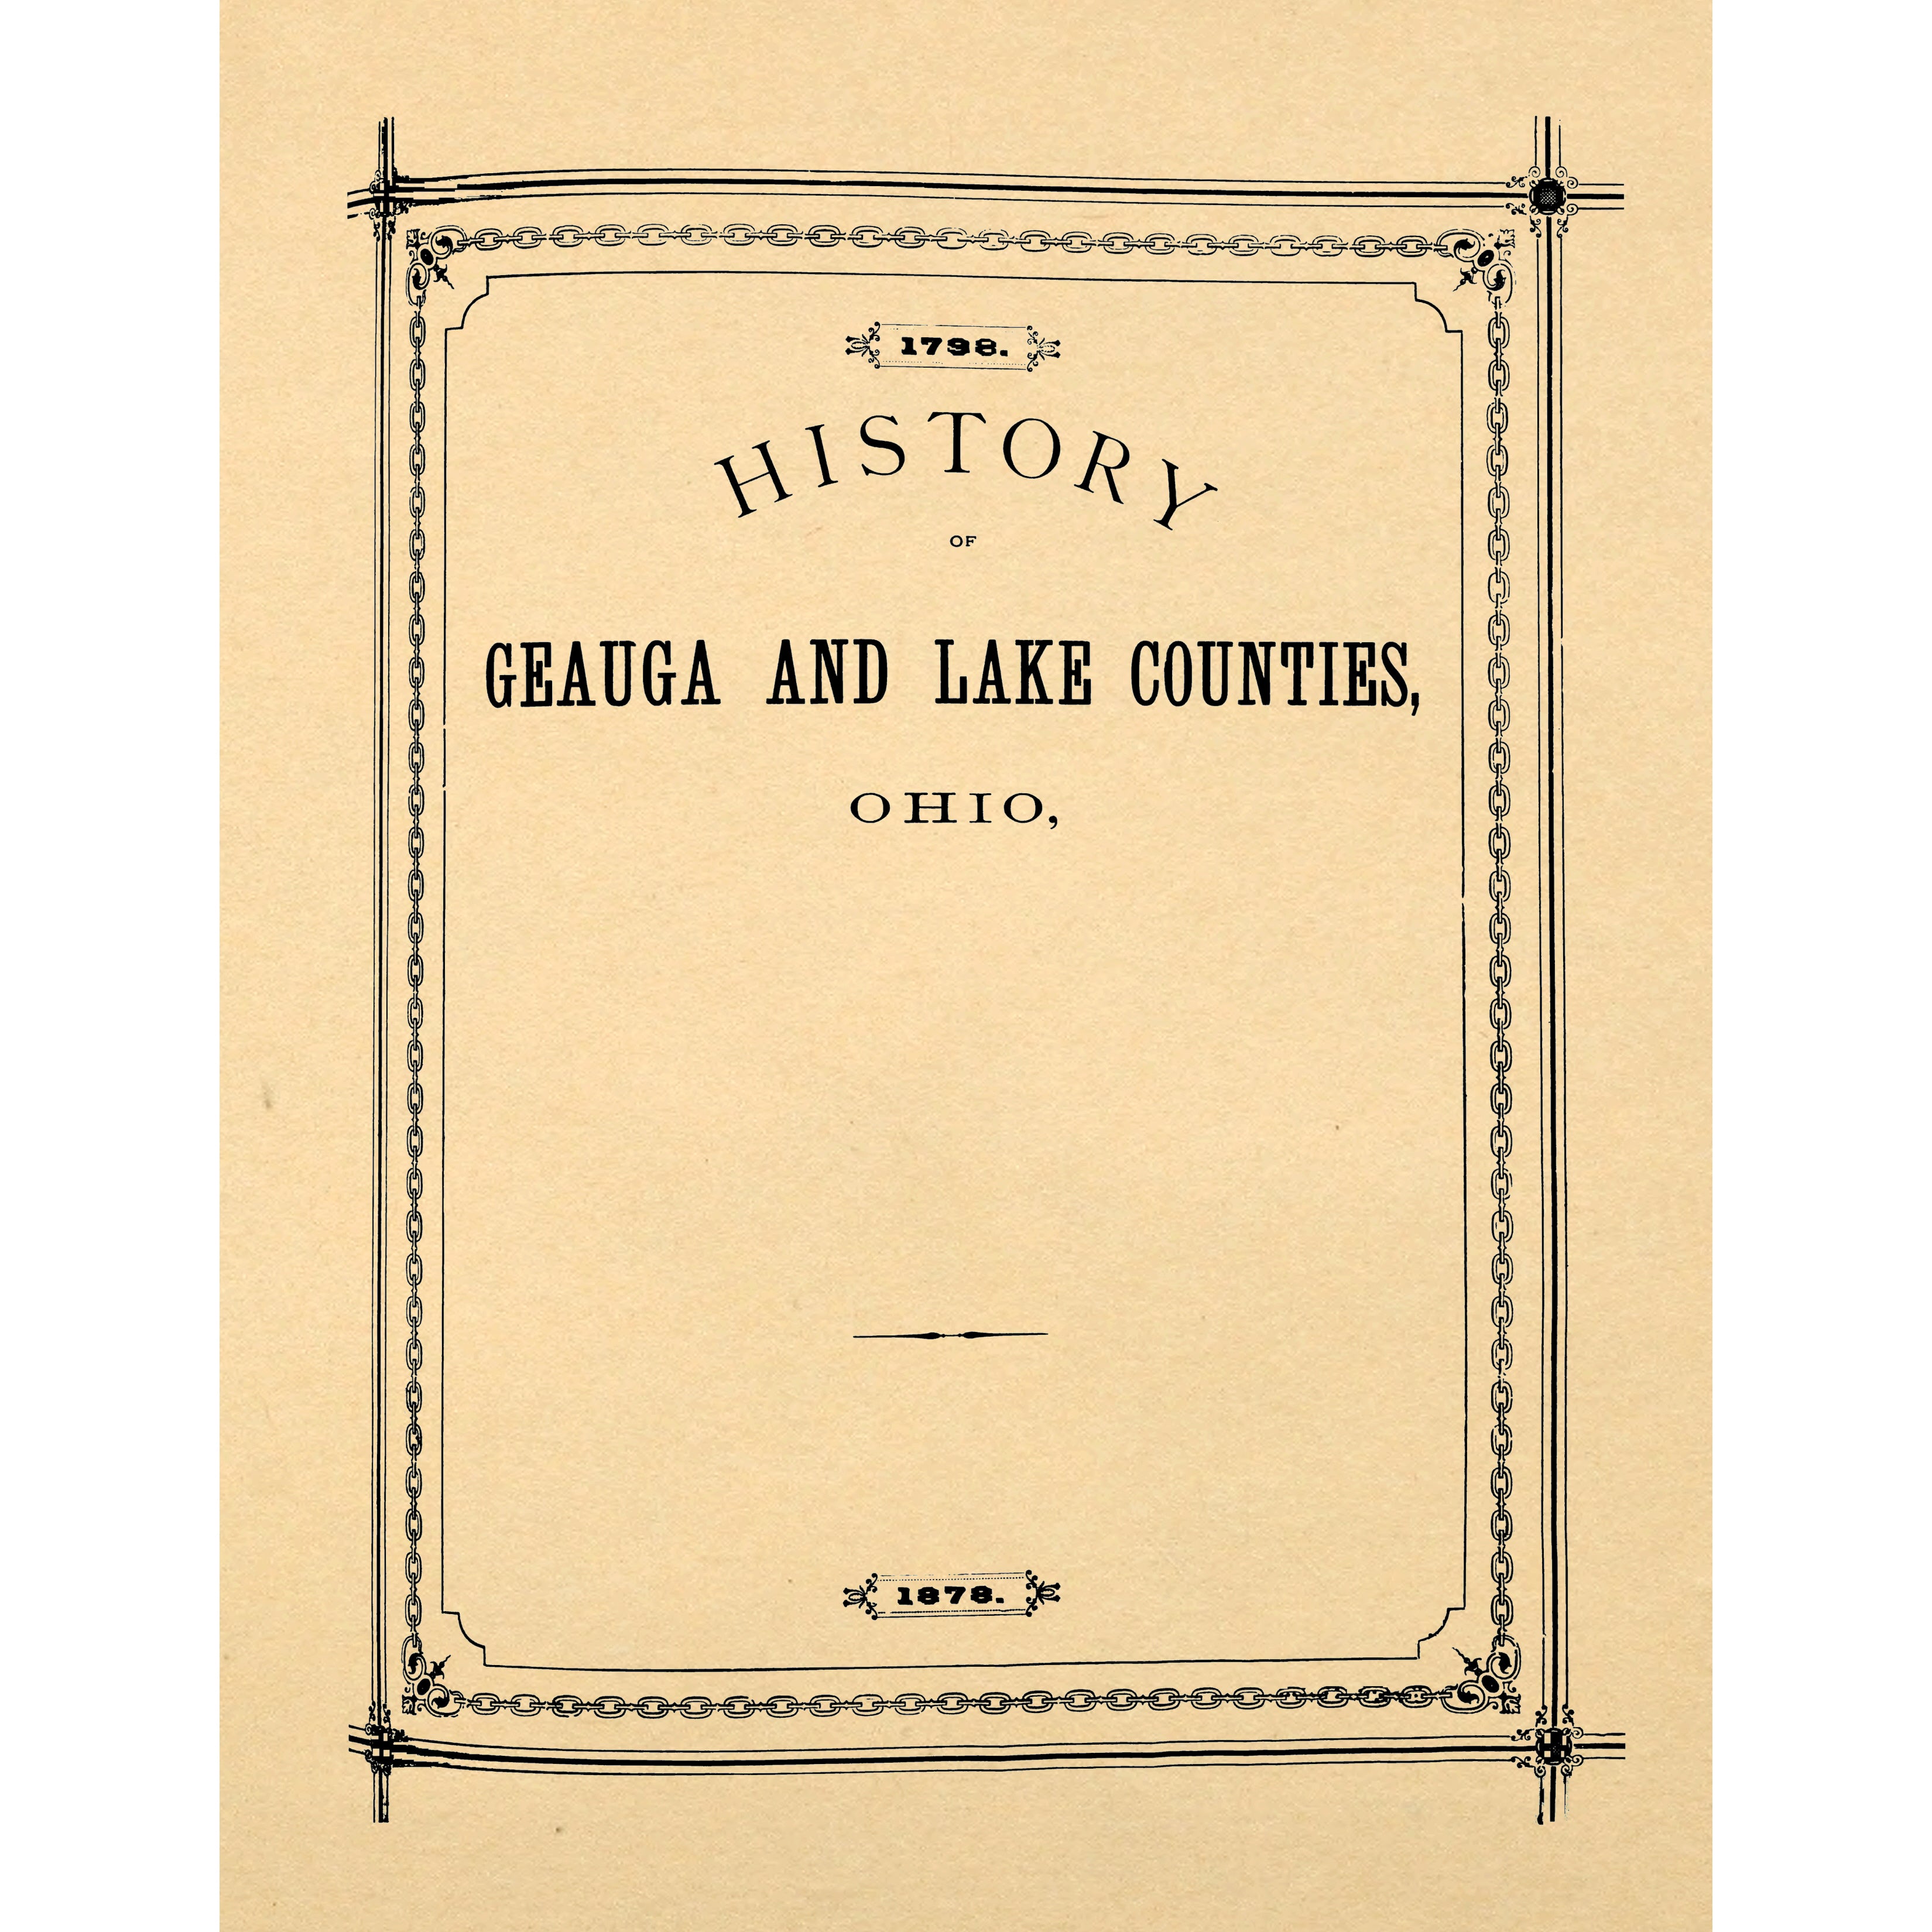 History of Geauga and Lake Counties, Ohio